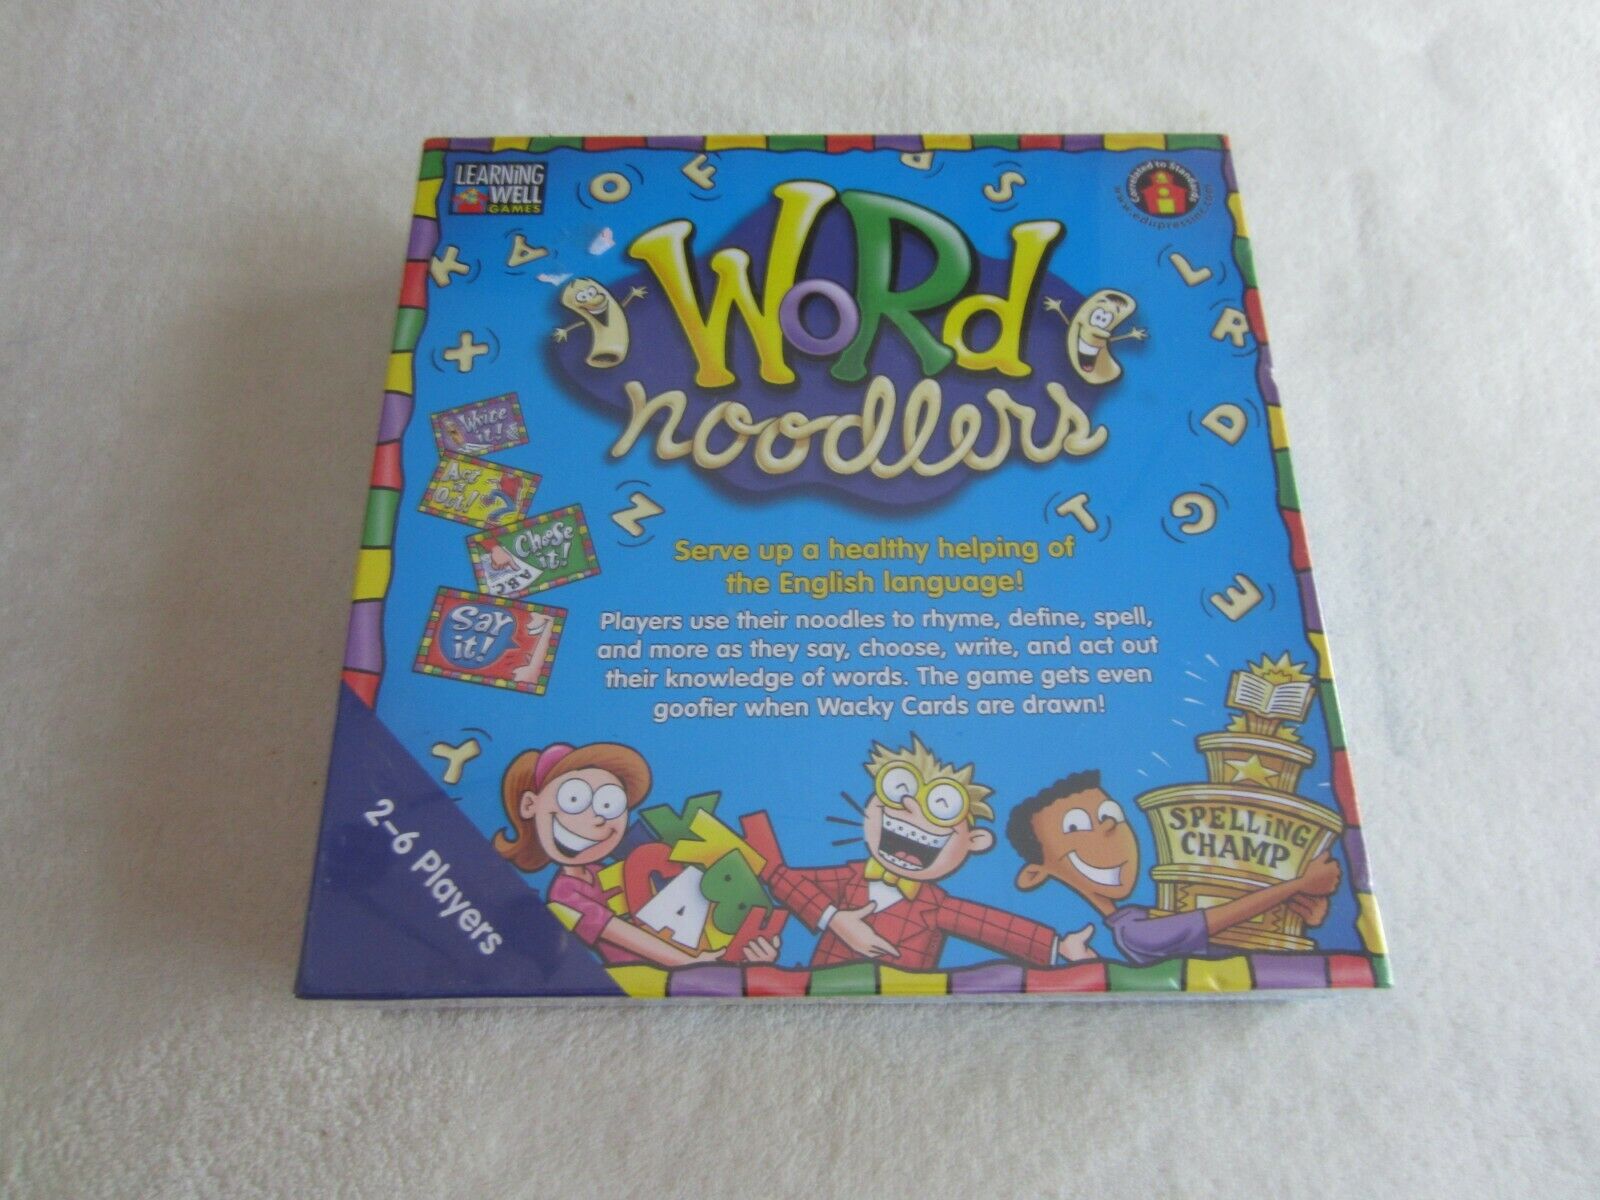 2010 Learning Well Games Word Noodlers - Factory Sealed